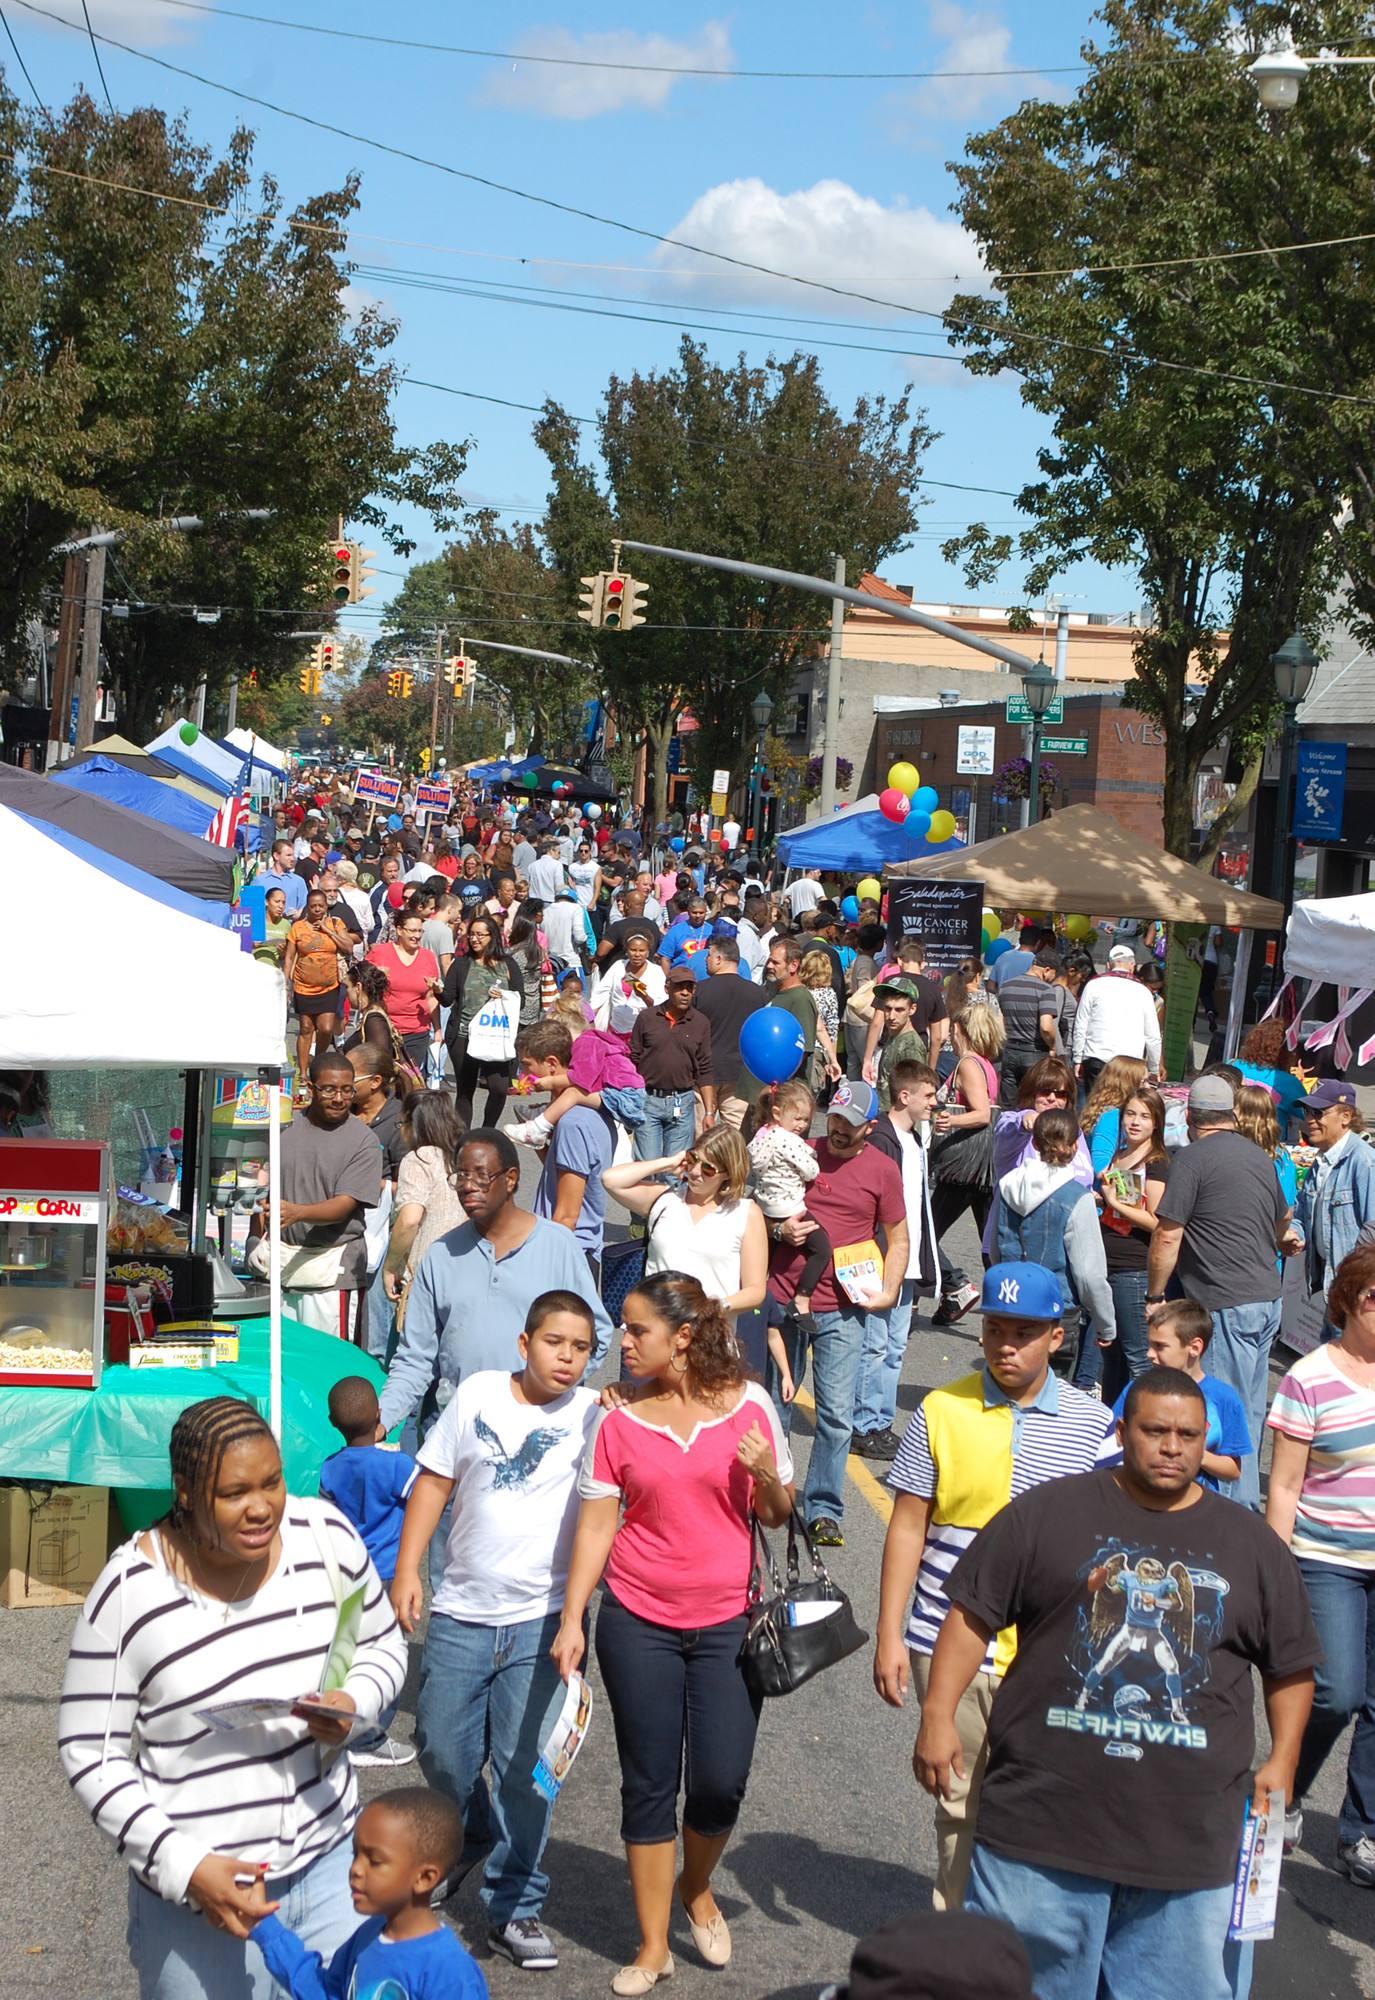 By midday on Saturday, Rockaway Avenue was lined from end to end with residents attending the second annual Valley Stream Community Fest.